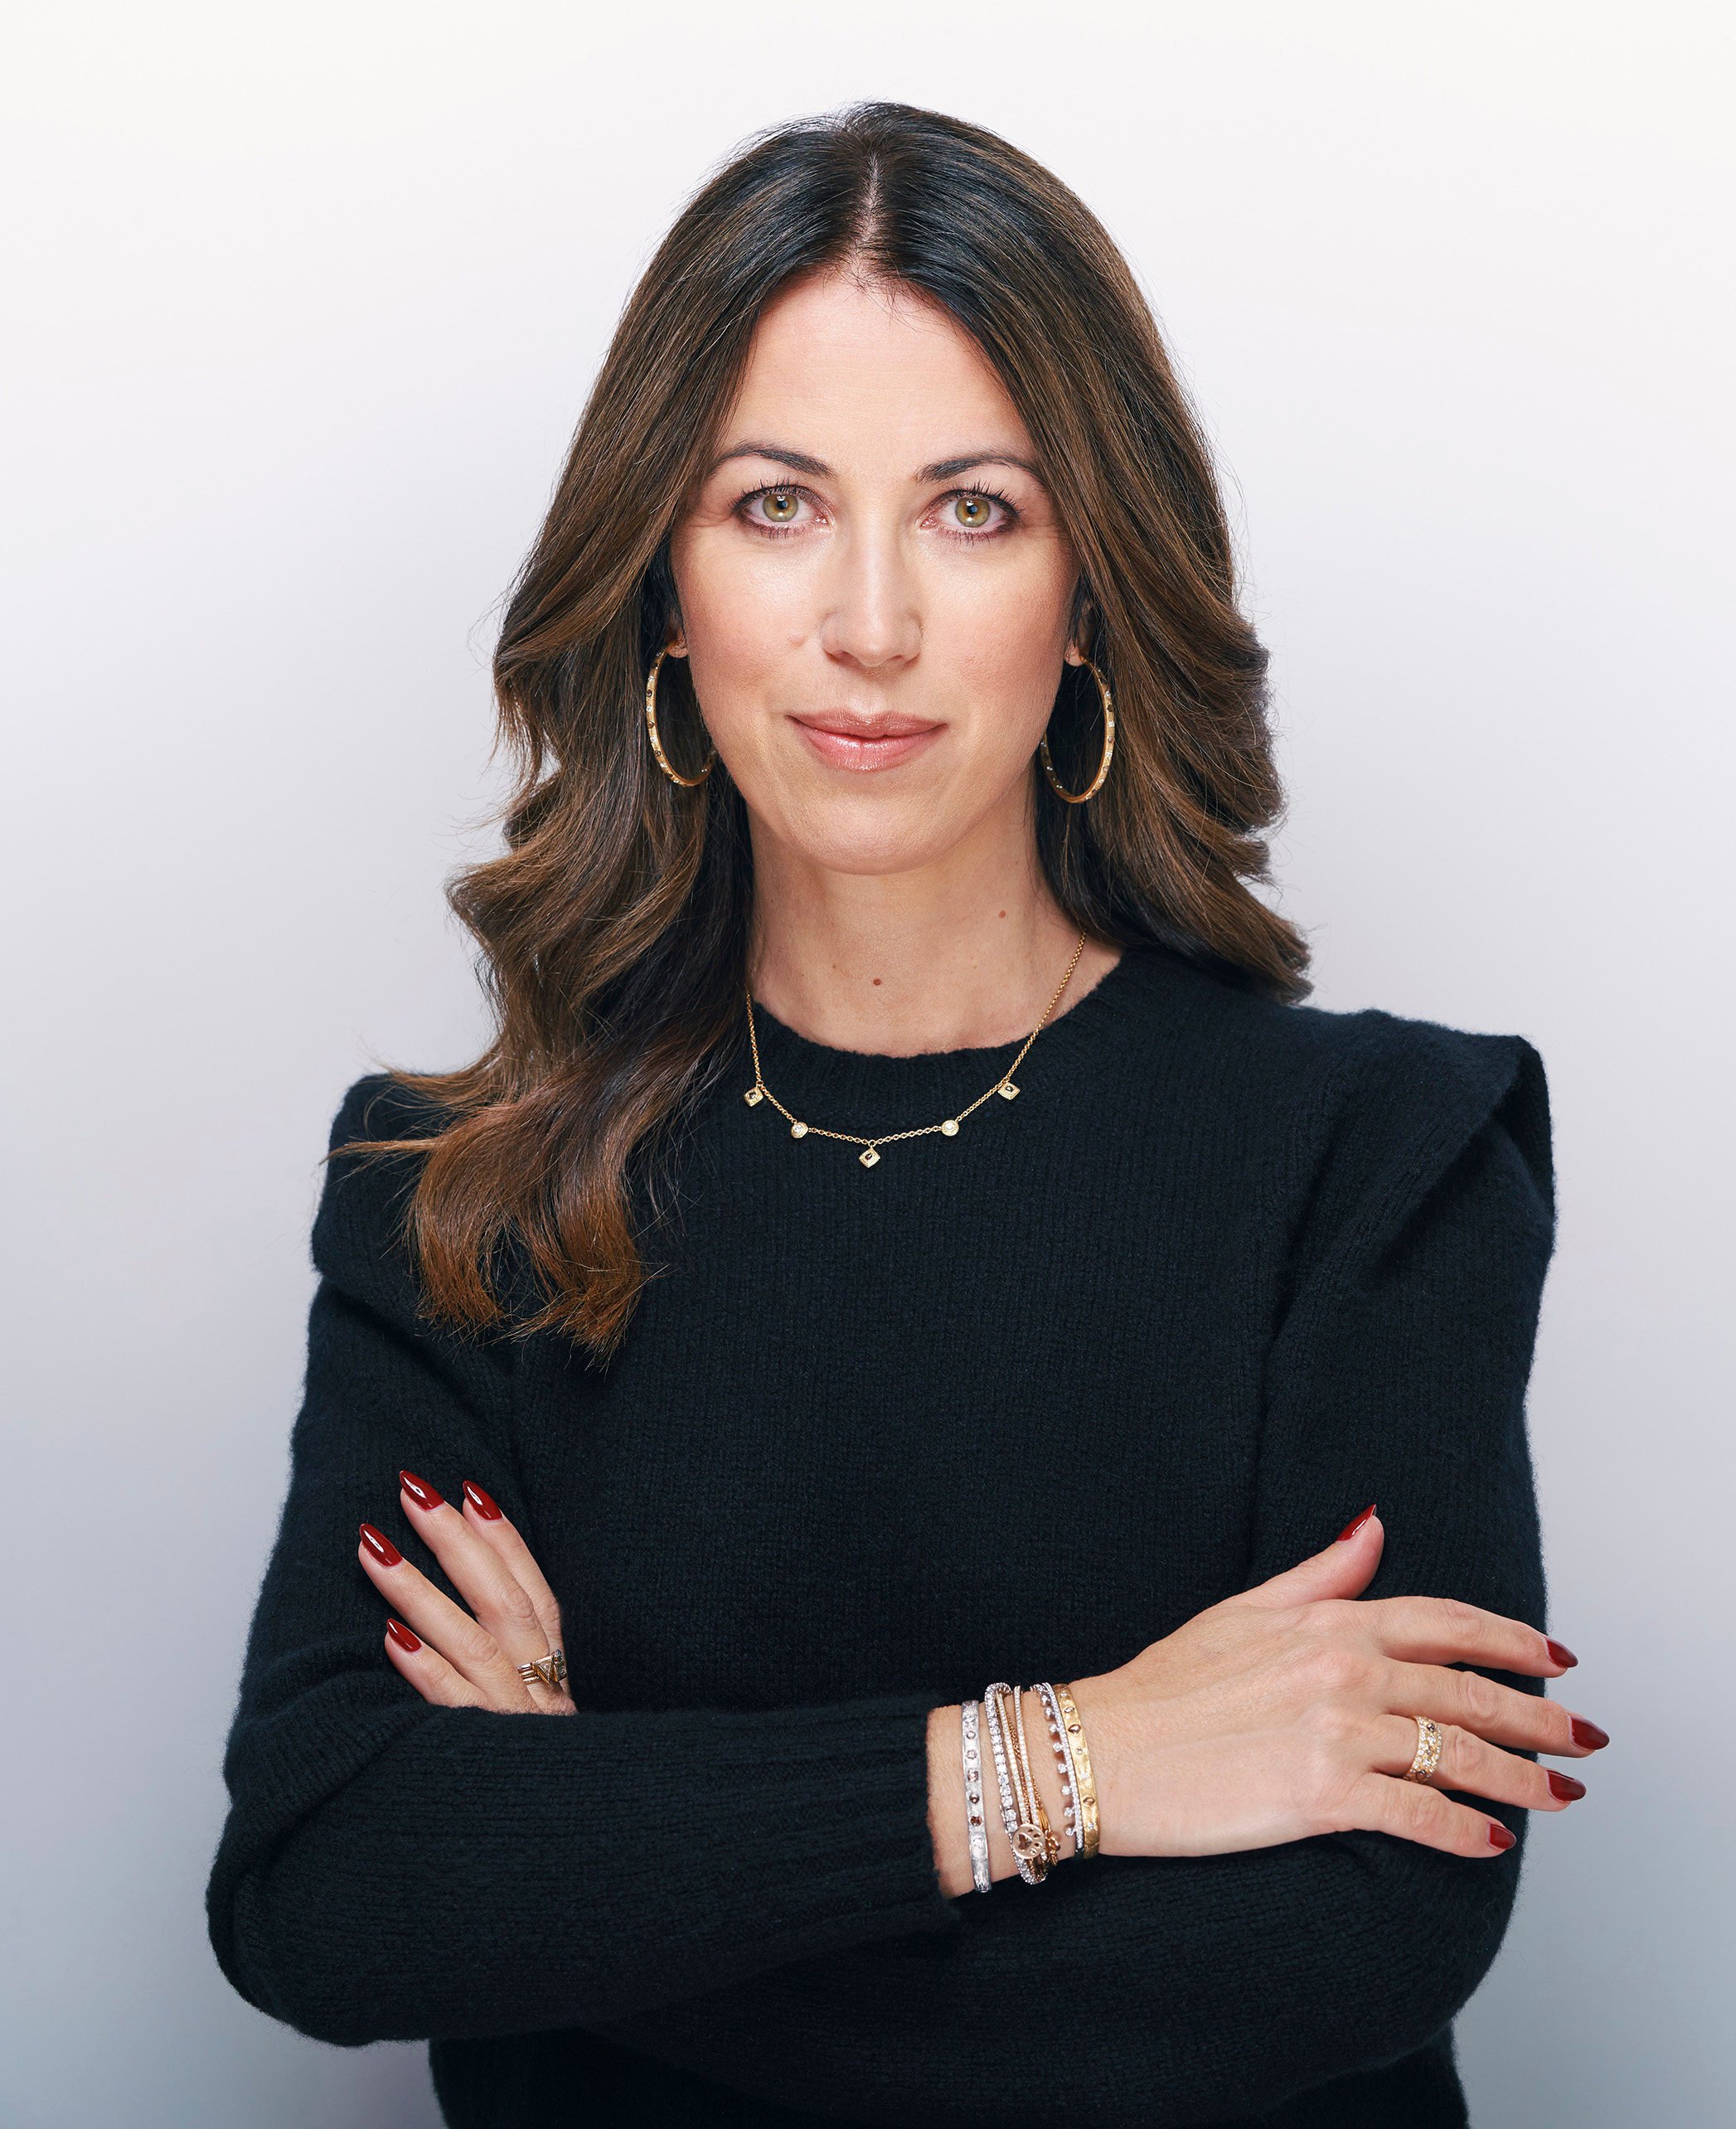 Céline Assimon, CEO of De Beers Jewellers and De Beers Forevermark, says De Beers Jewellers are targeting Gen Z and Gen Alpha by addressing ESG issues and embracing opportunities such as the blockchain. Photos: De Beers